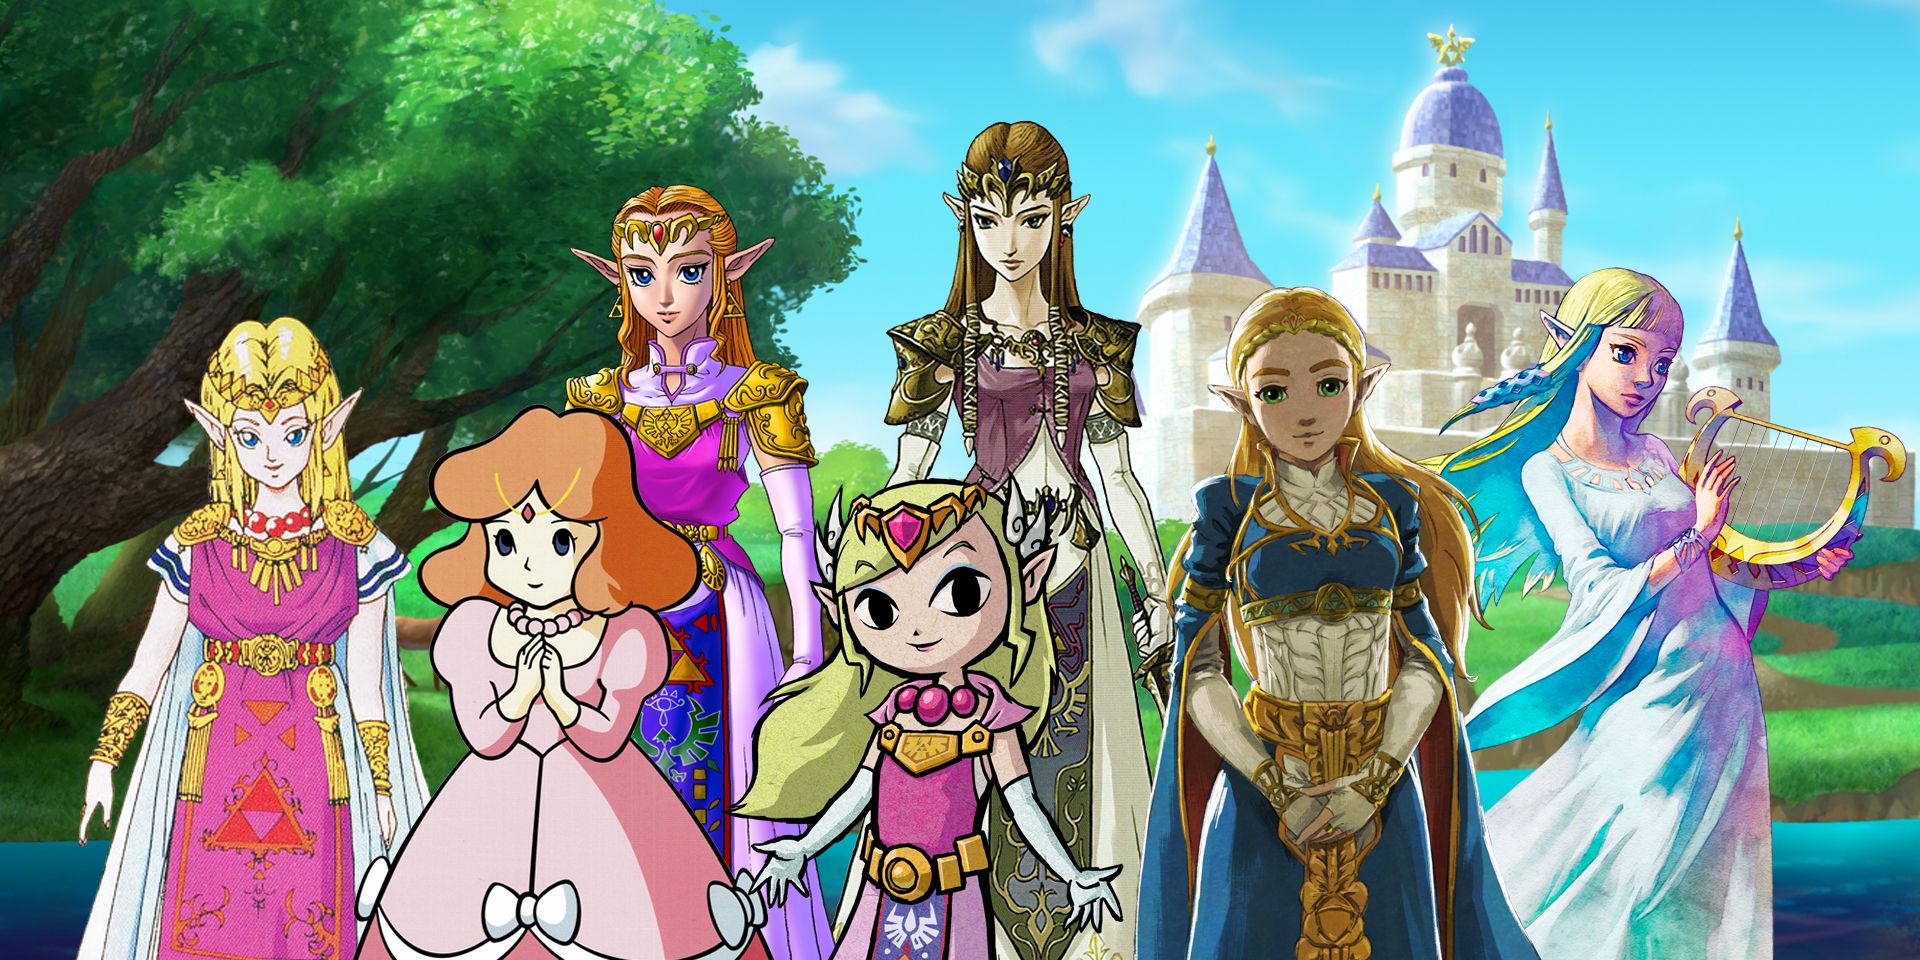 Different incarnations of Princess Zelda stand in front of Hyrule Castle.